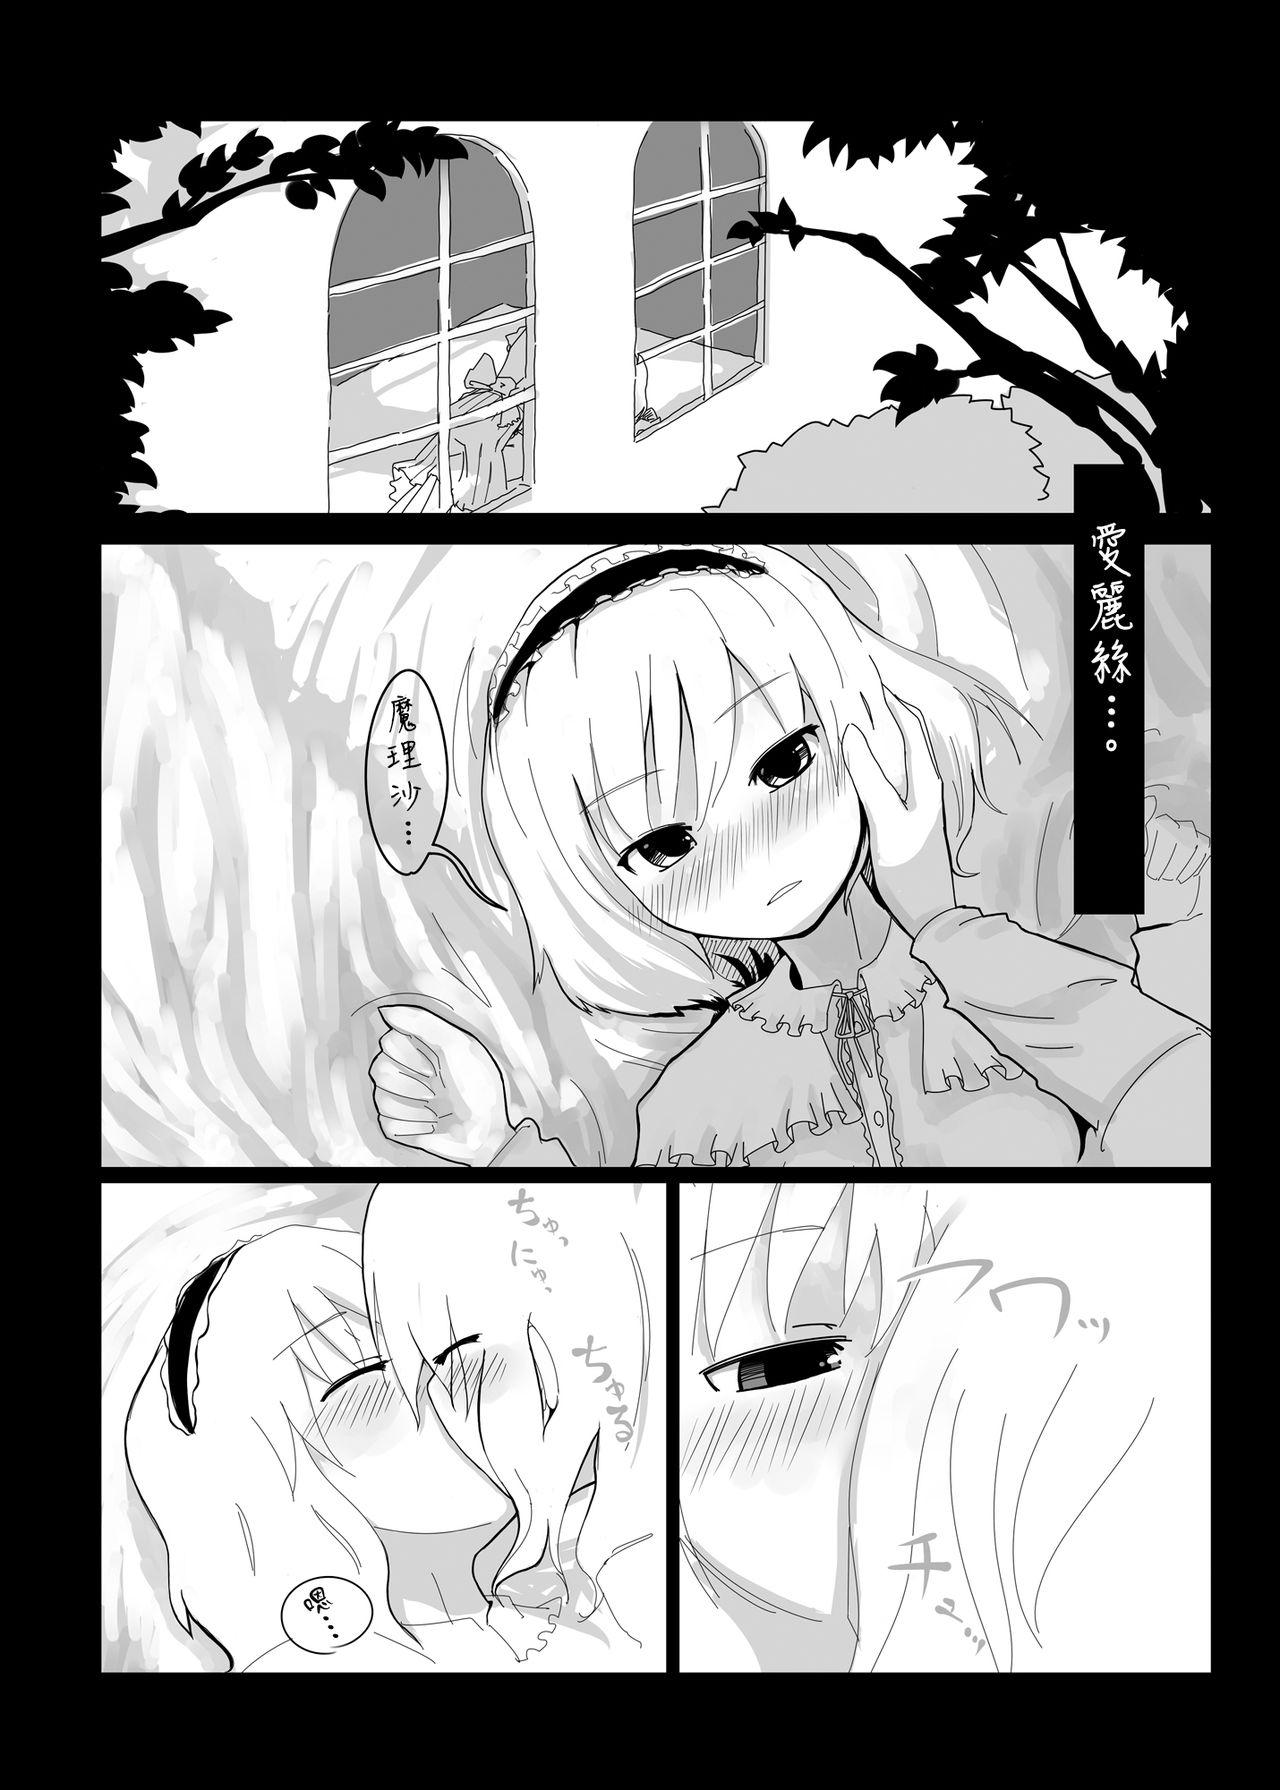 Group Touhou Ero Atsume. - Touhou project Pounded - Page 6